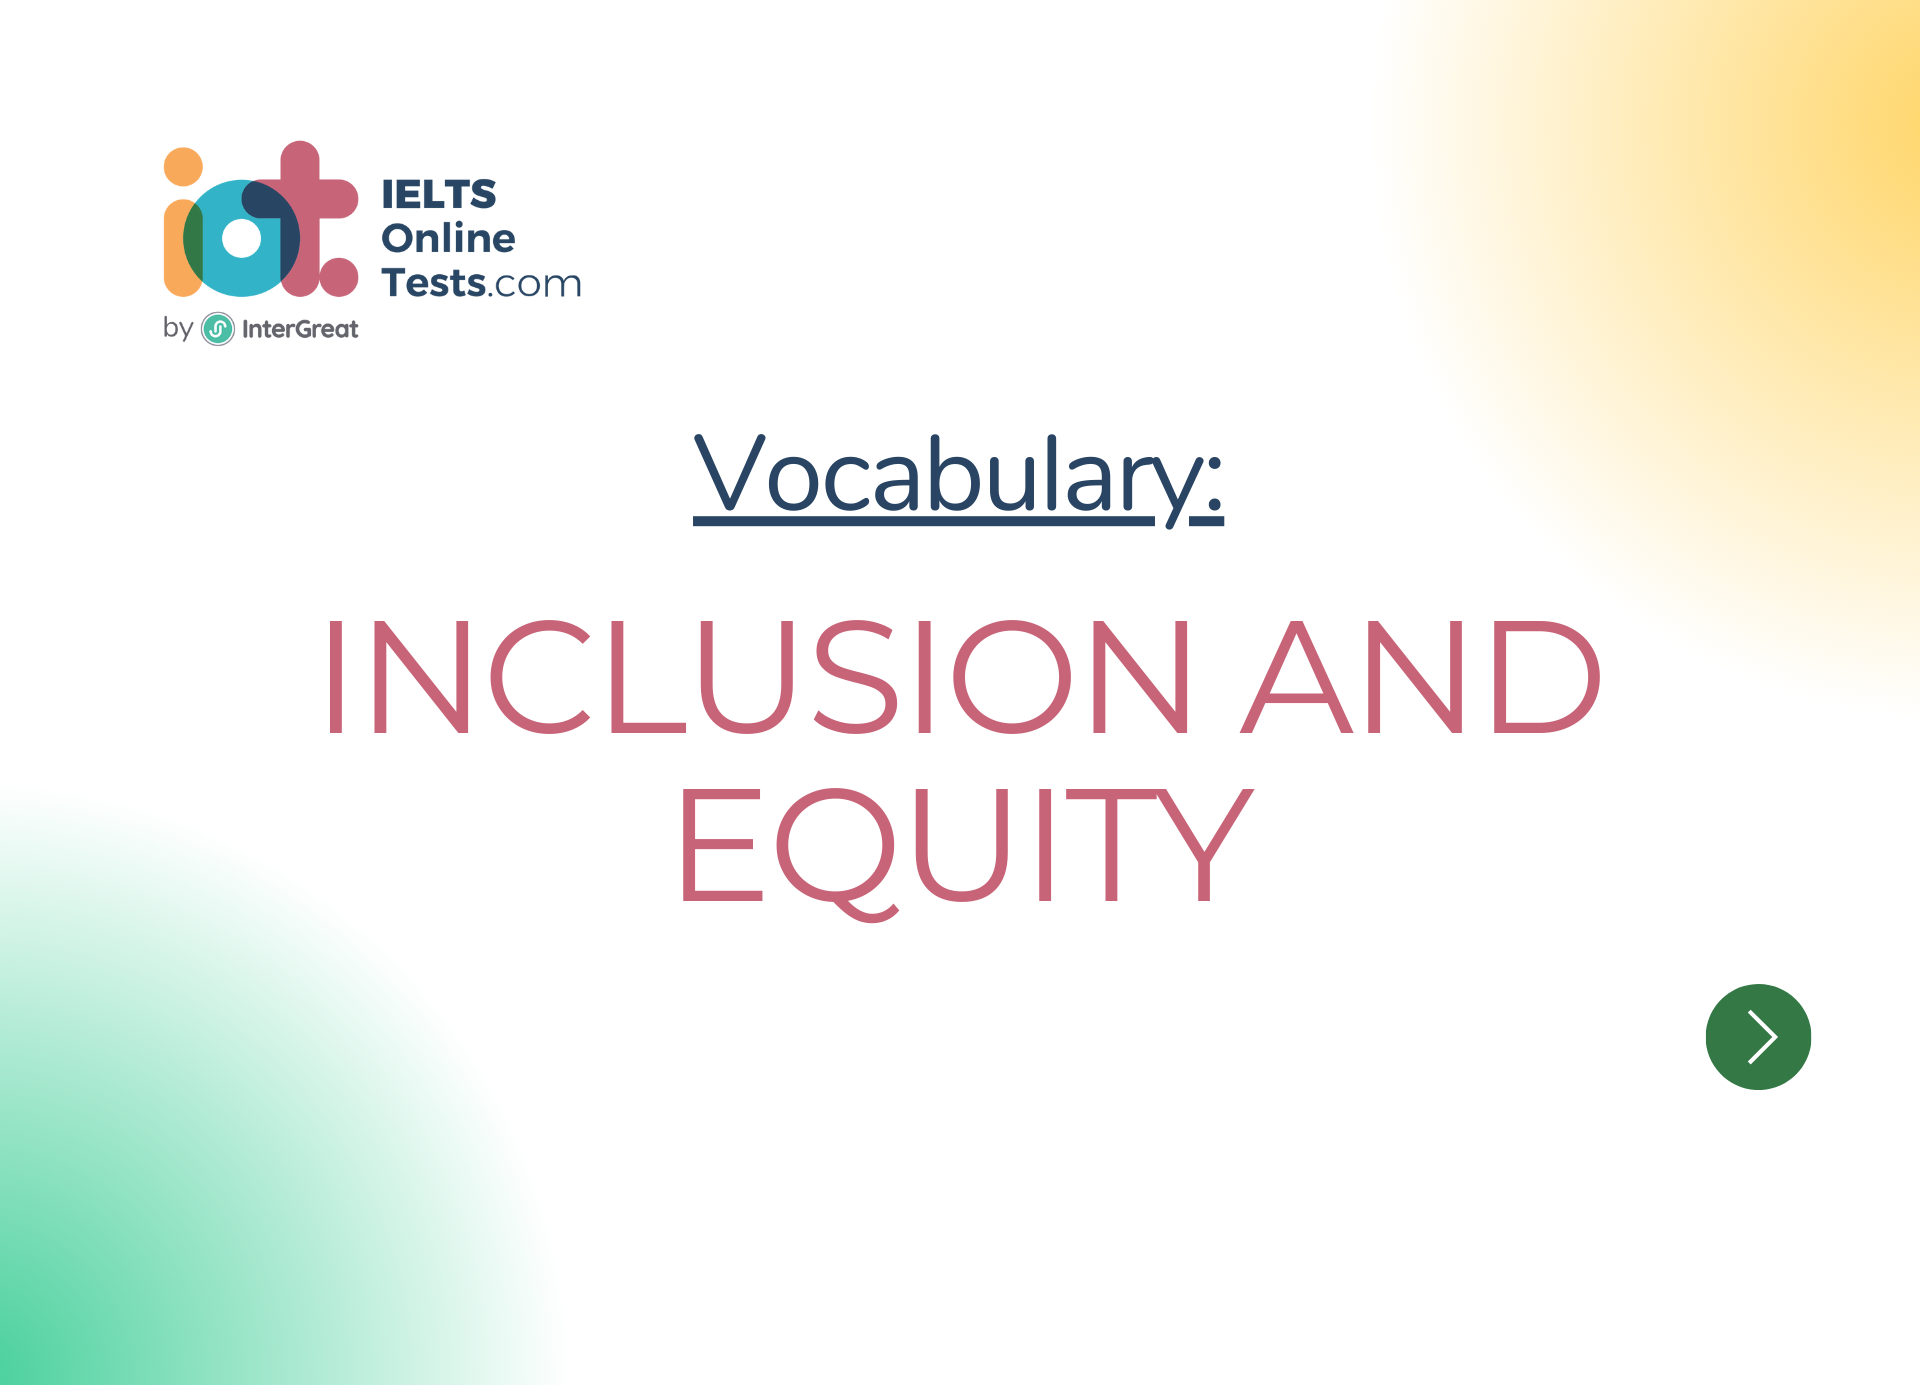 Inclusion and equity